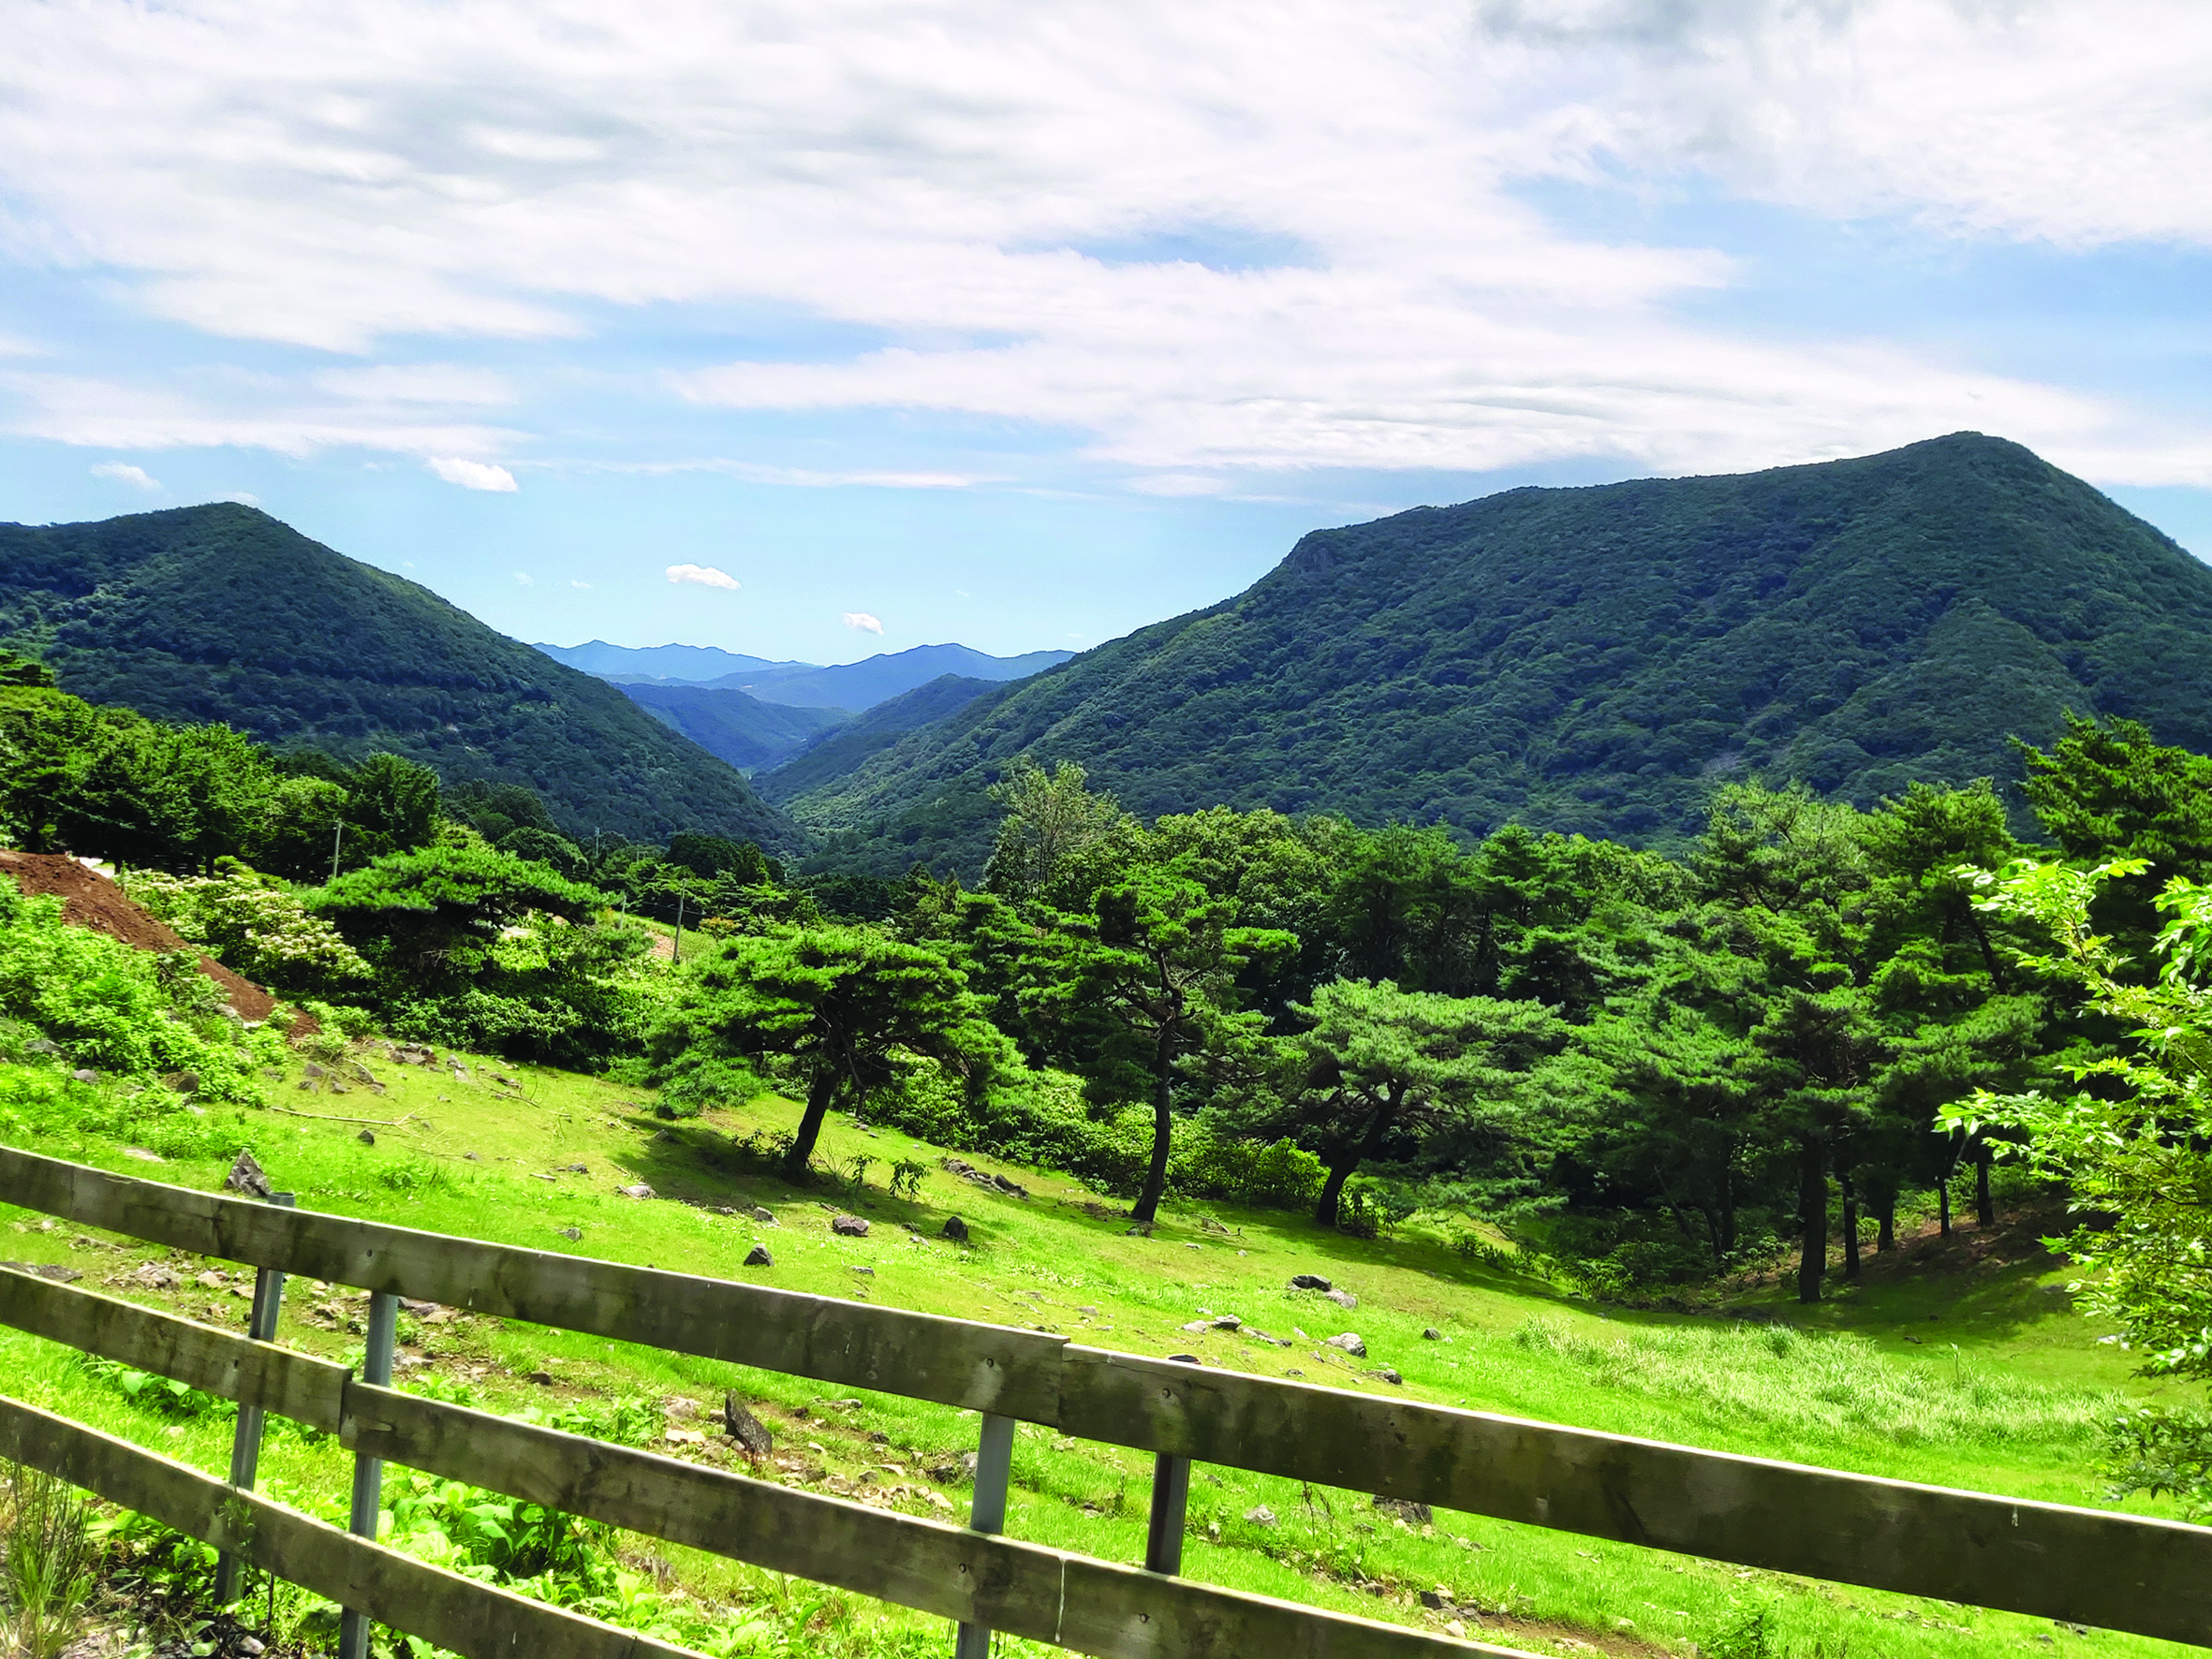 Enjoying Nature in Hwasun: A Sheep Farm by a Cypress Forest